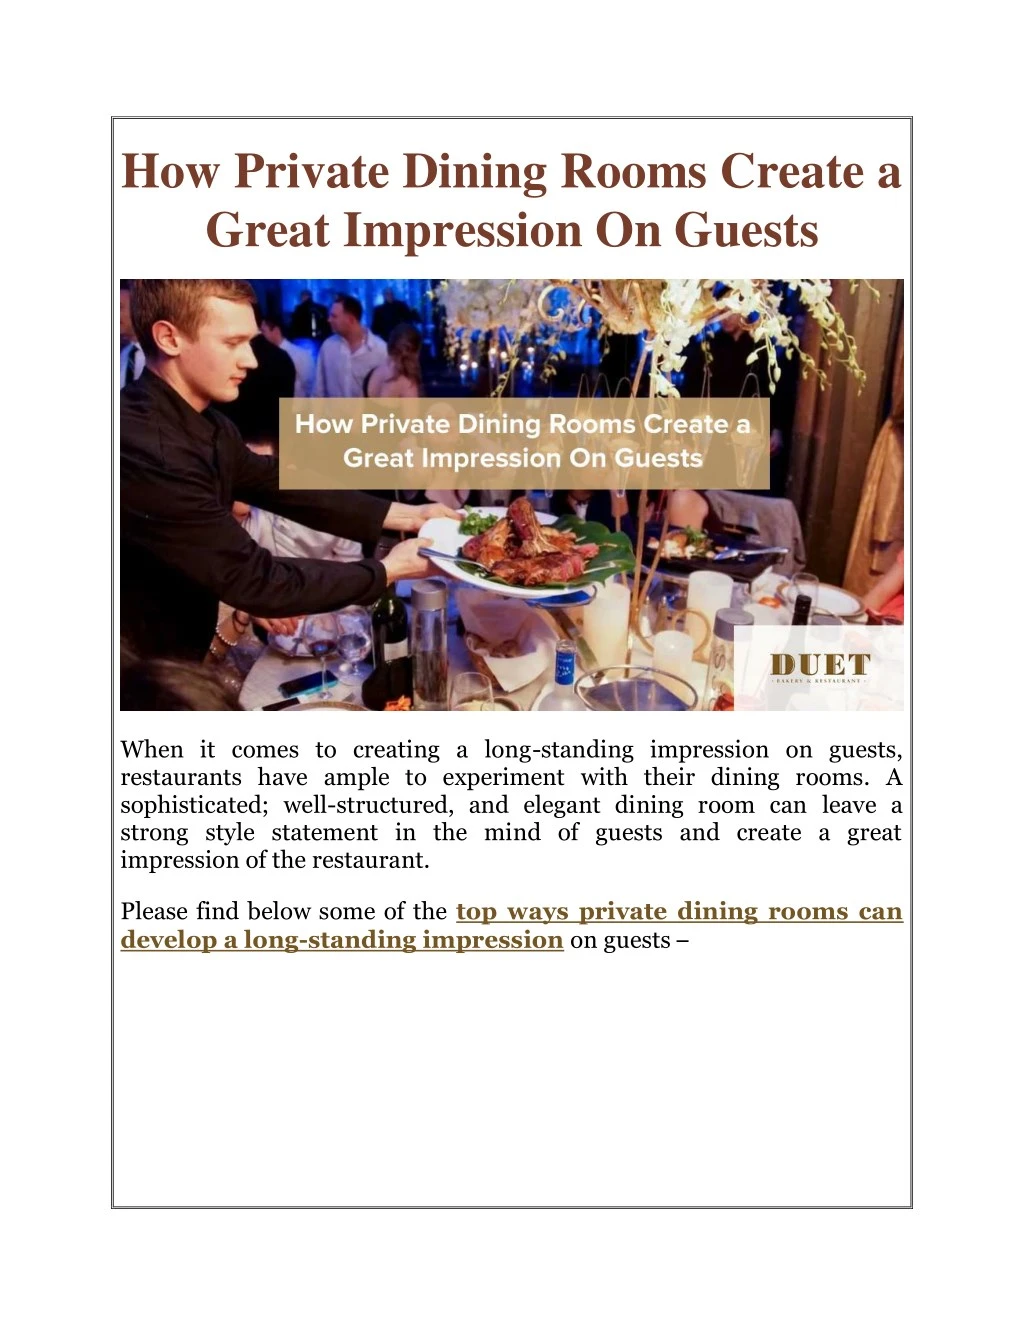 how private dining rooms create a great